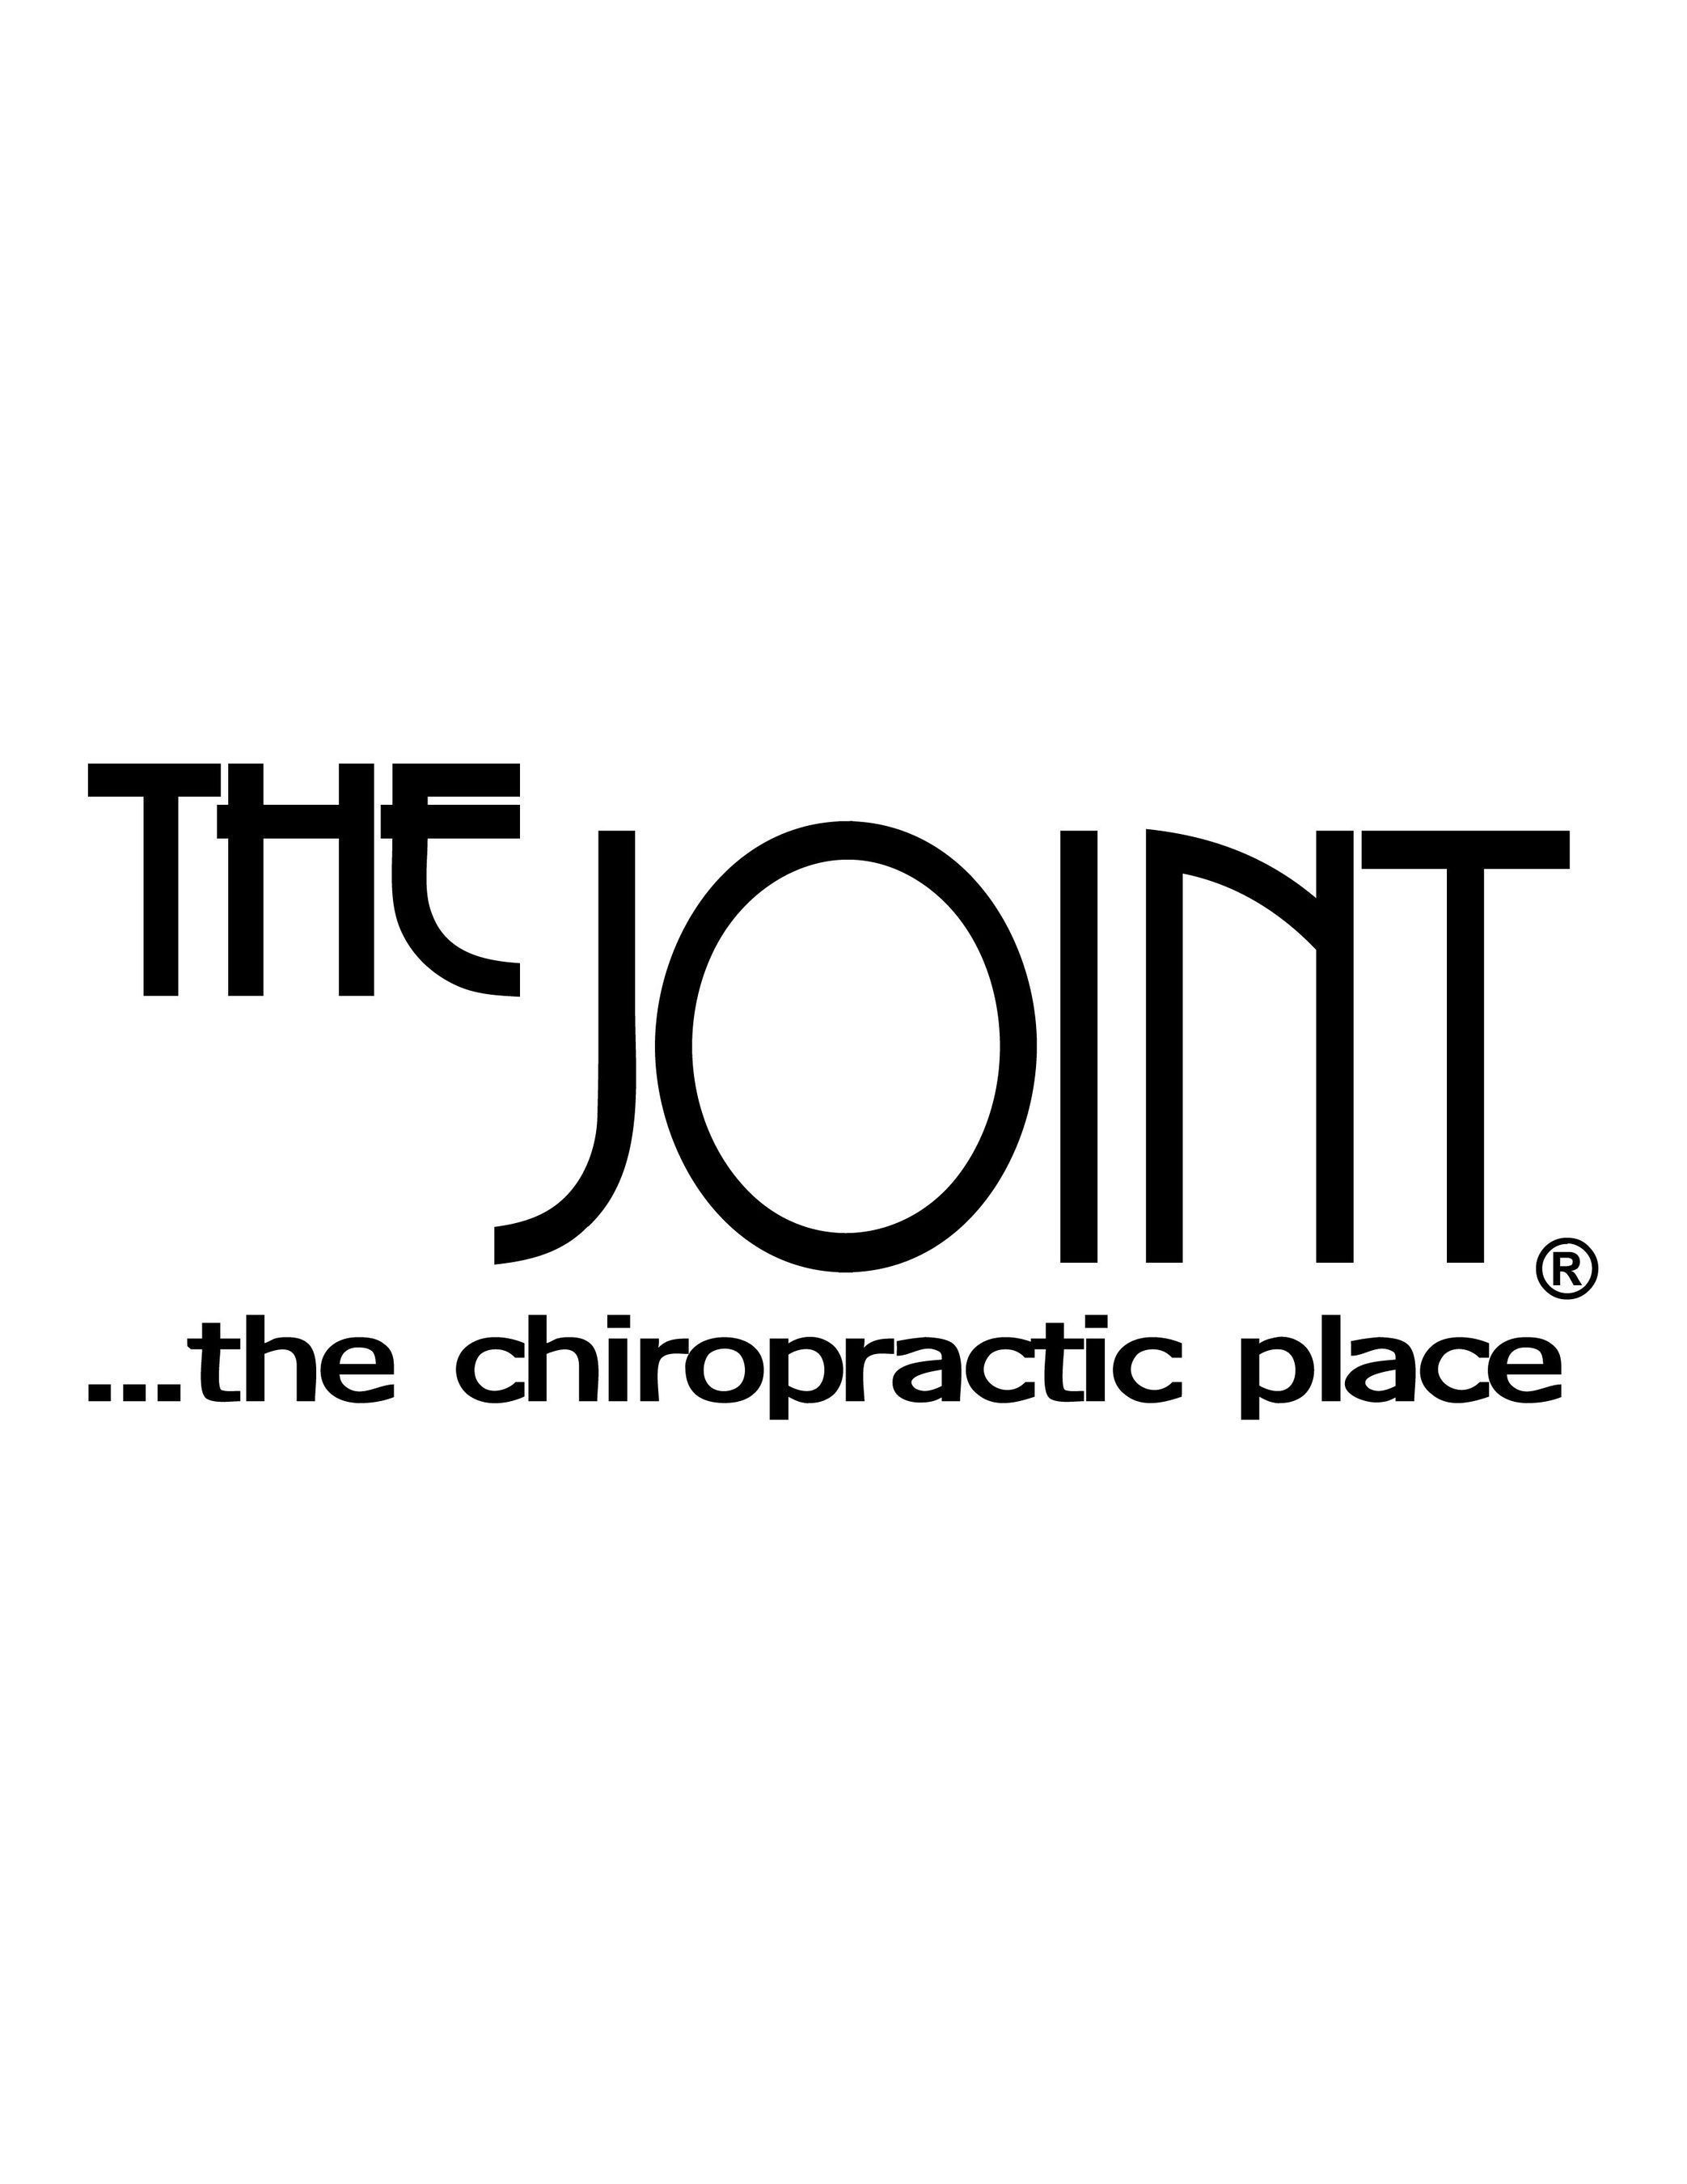 The Joint...the chiropractic place(R), is reinventing chiropractic care through a franchise model that makes quality alternative healthcare affordable for patients while simplifying business operations for chiropractors and franchise owners. Its affordable membership plans eliminate the need for insurance, and its no-appointments policy and convenient locations make care more accessible. The company has more than 200 clinics open and 450 in development in 30 states.